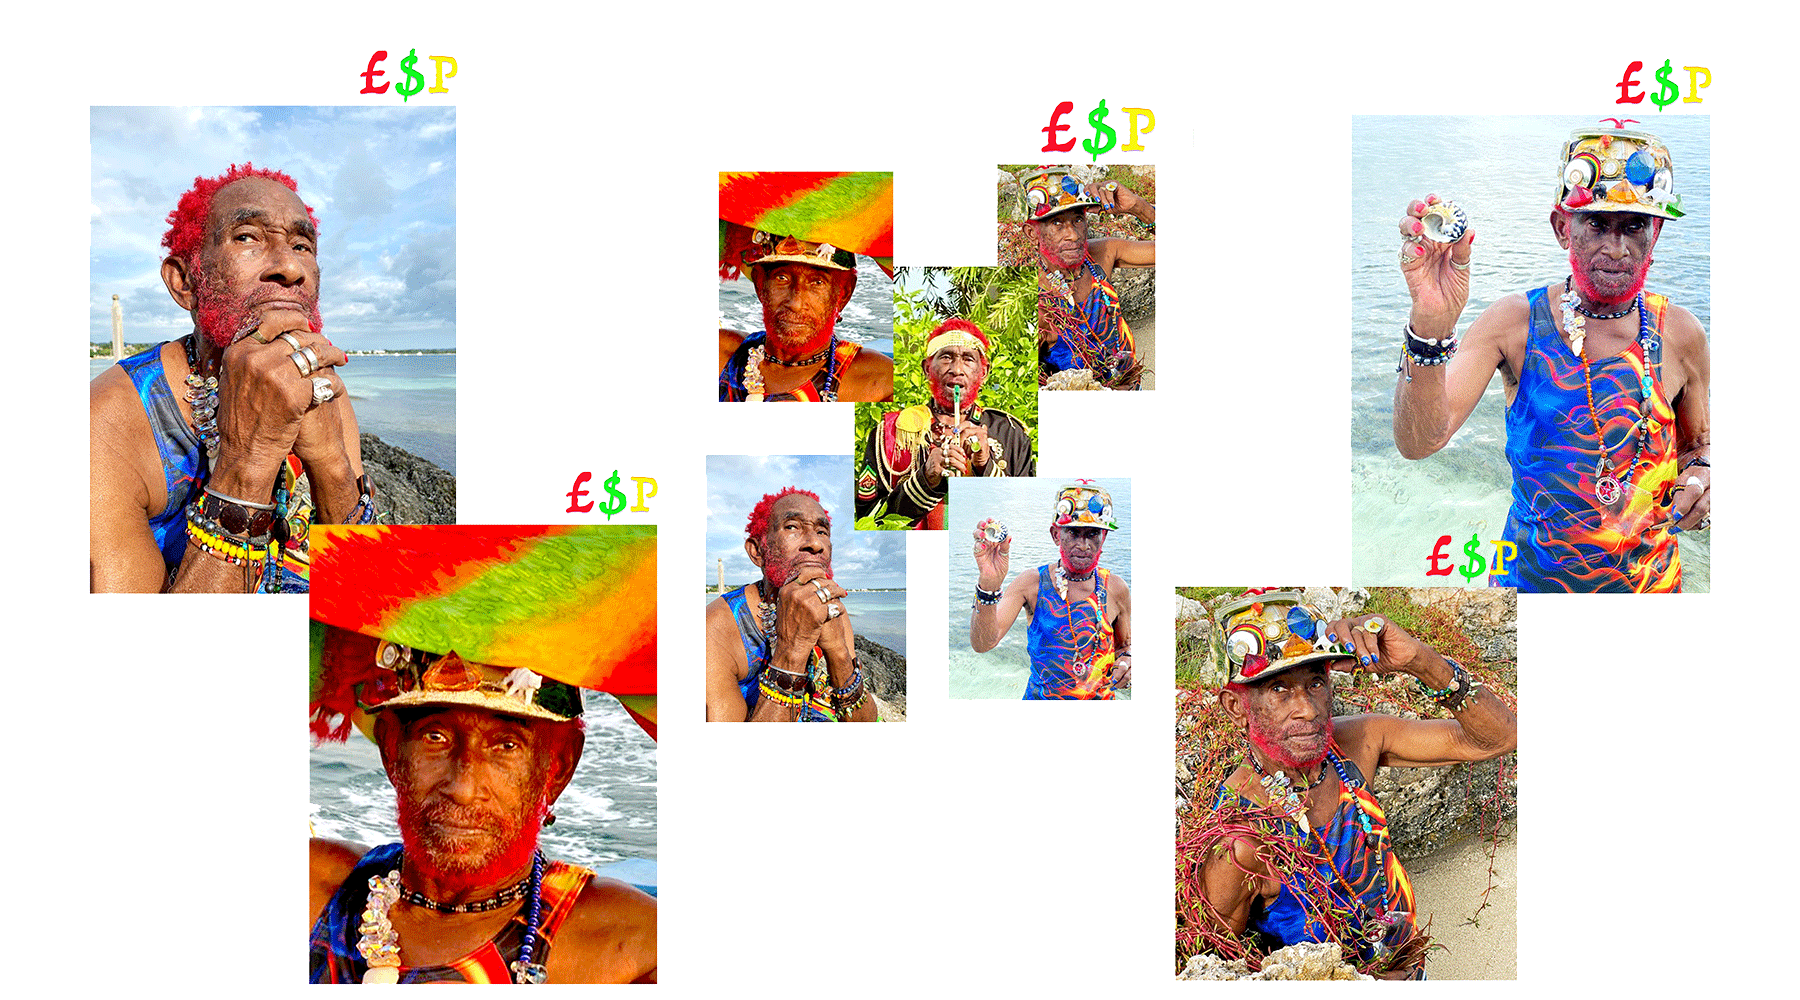 R.I.P. £$P Collection